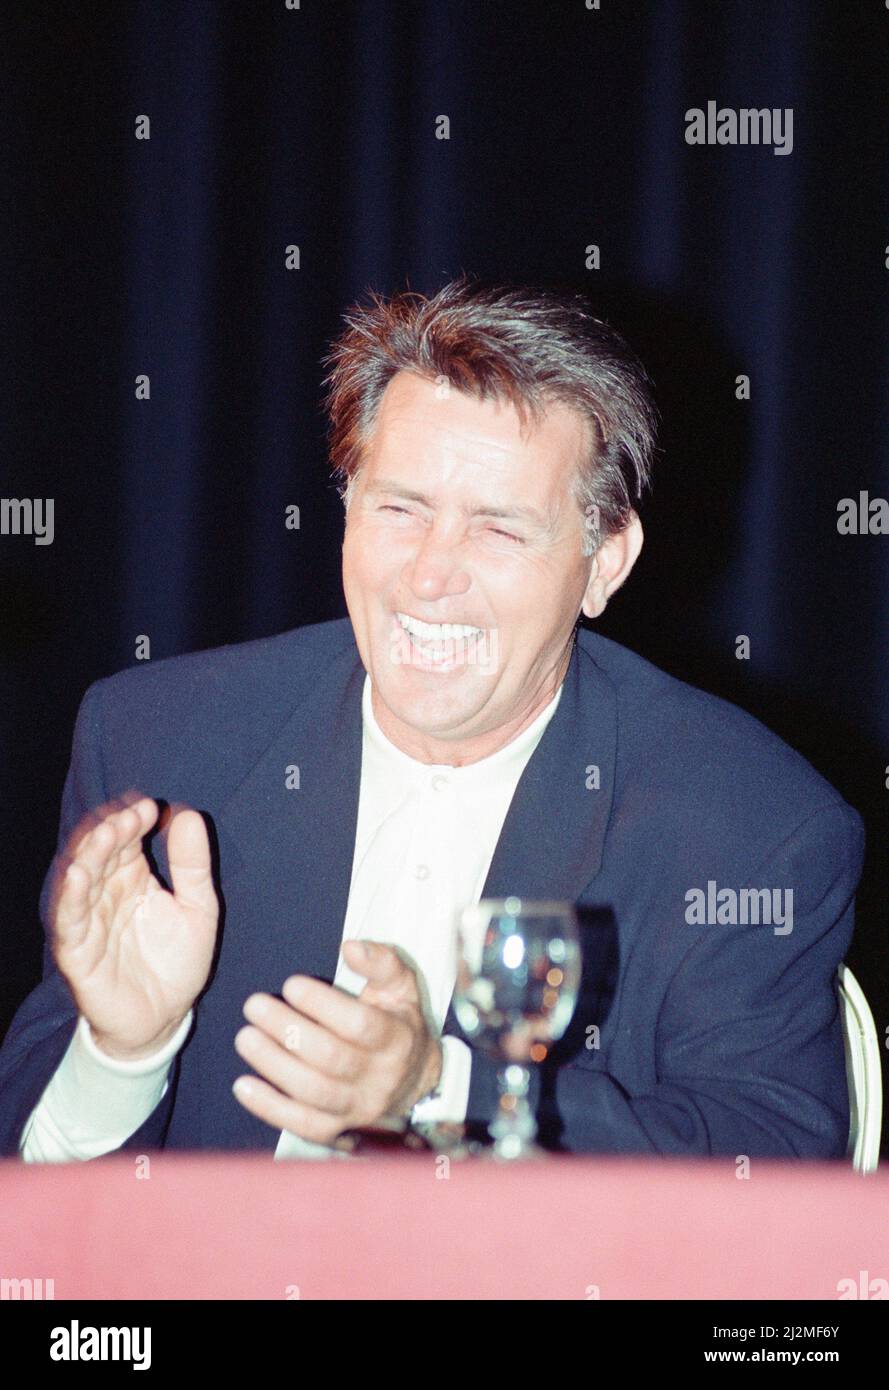 Deauville American Film Festival, Deauville, France, September 1990.  Our picture shows ... Martin Sheen at the festival to promote new film, Cadence, which he both directs and stars in as the character Major Sgt. Otis V. McKinney. Stock Photo